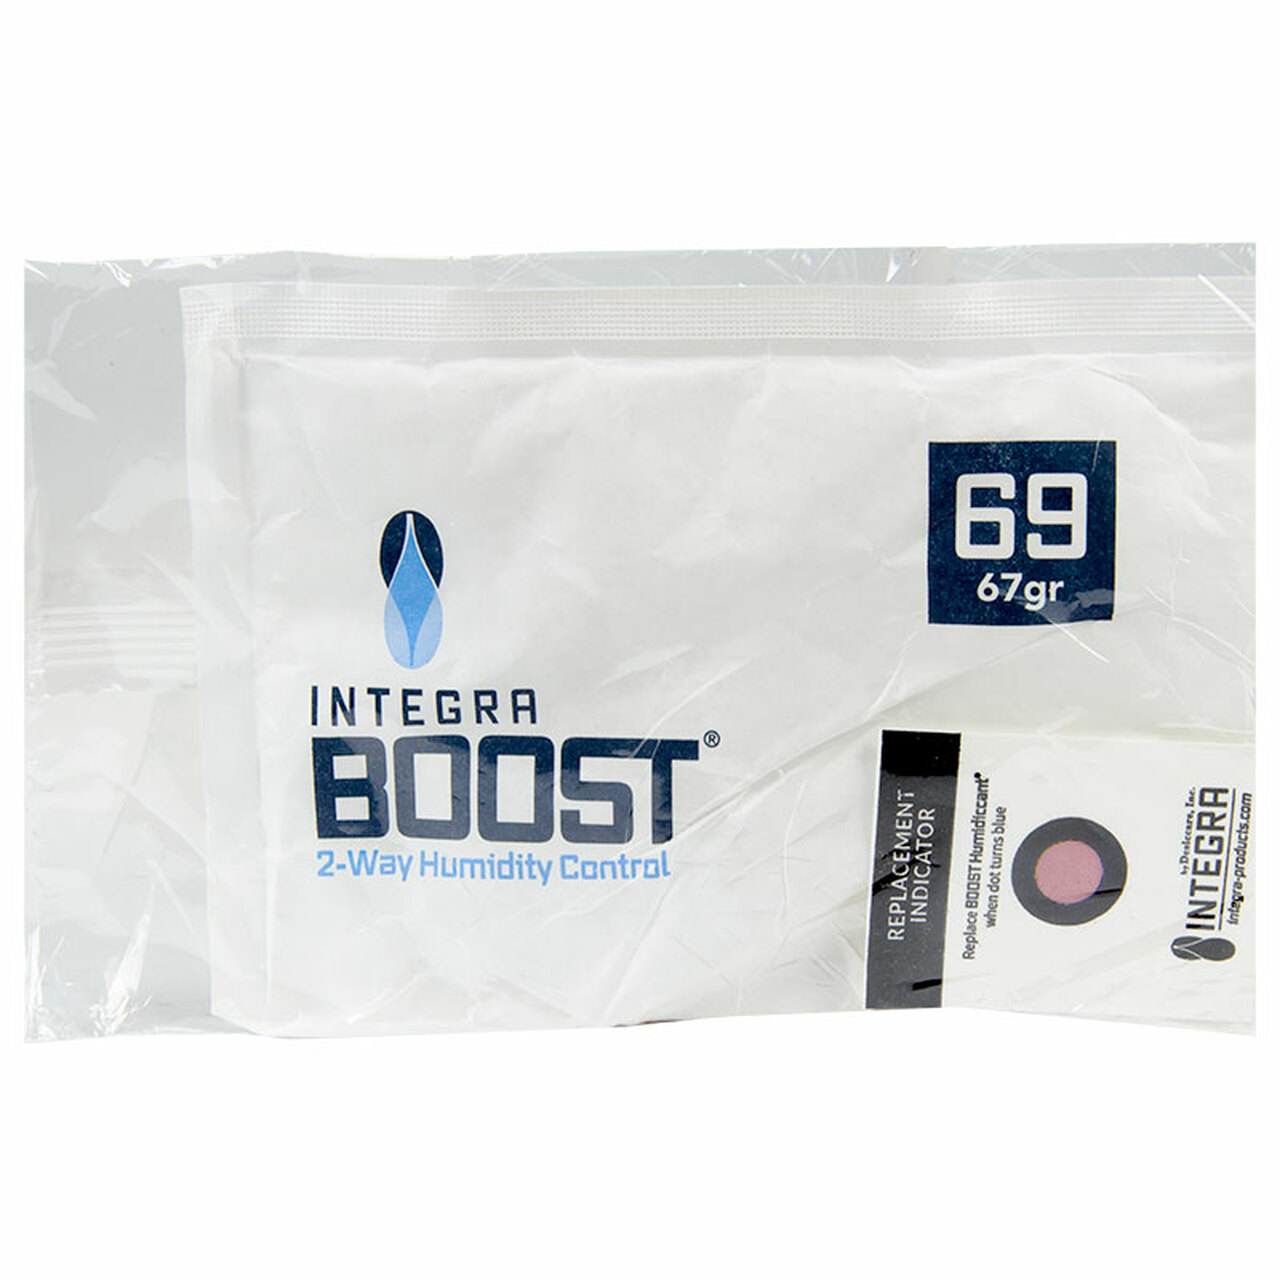 Desiccare Integra BOOST® 67 gram 69% RH retail box individually wrapped 2-way humidity control packs with HIC